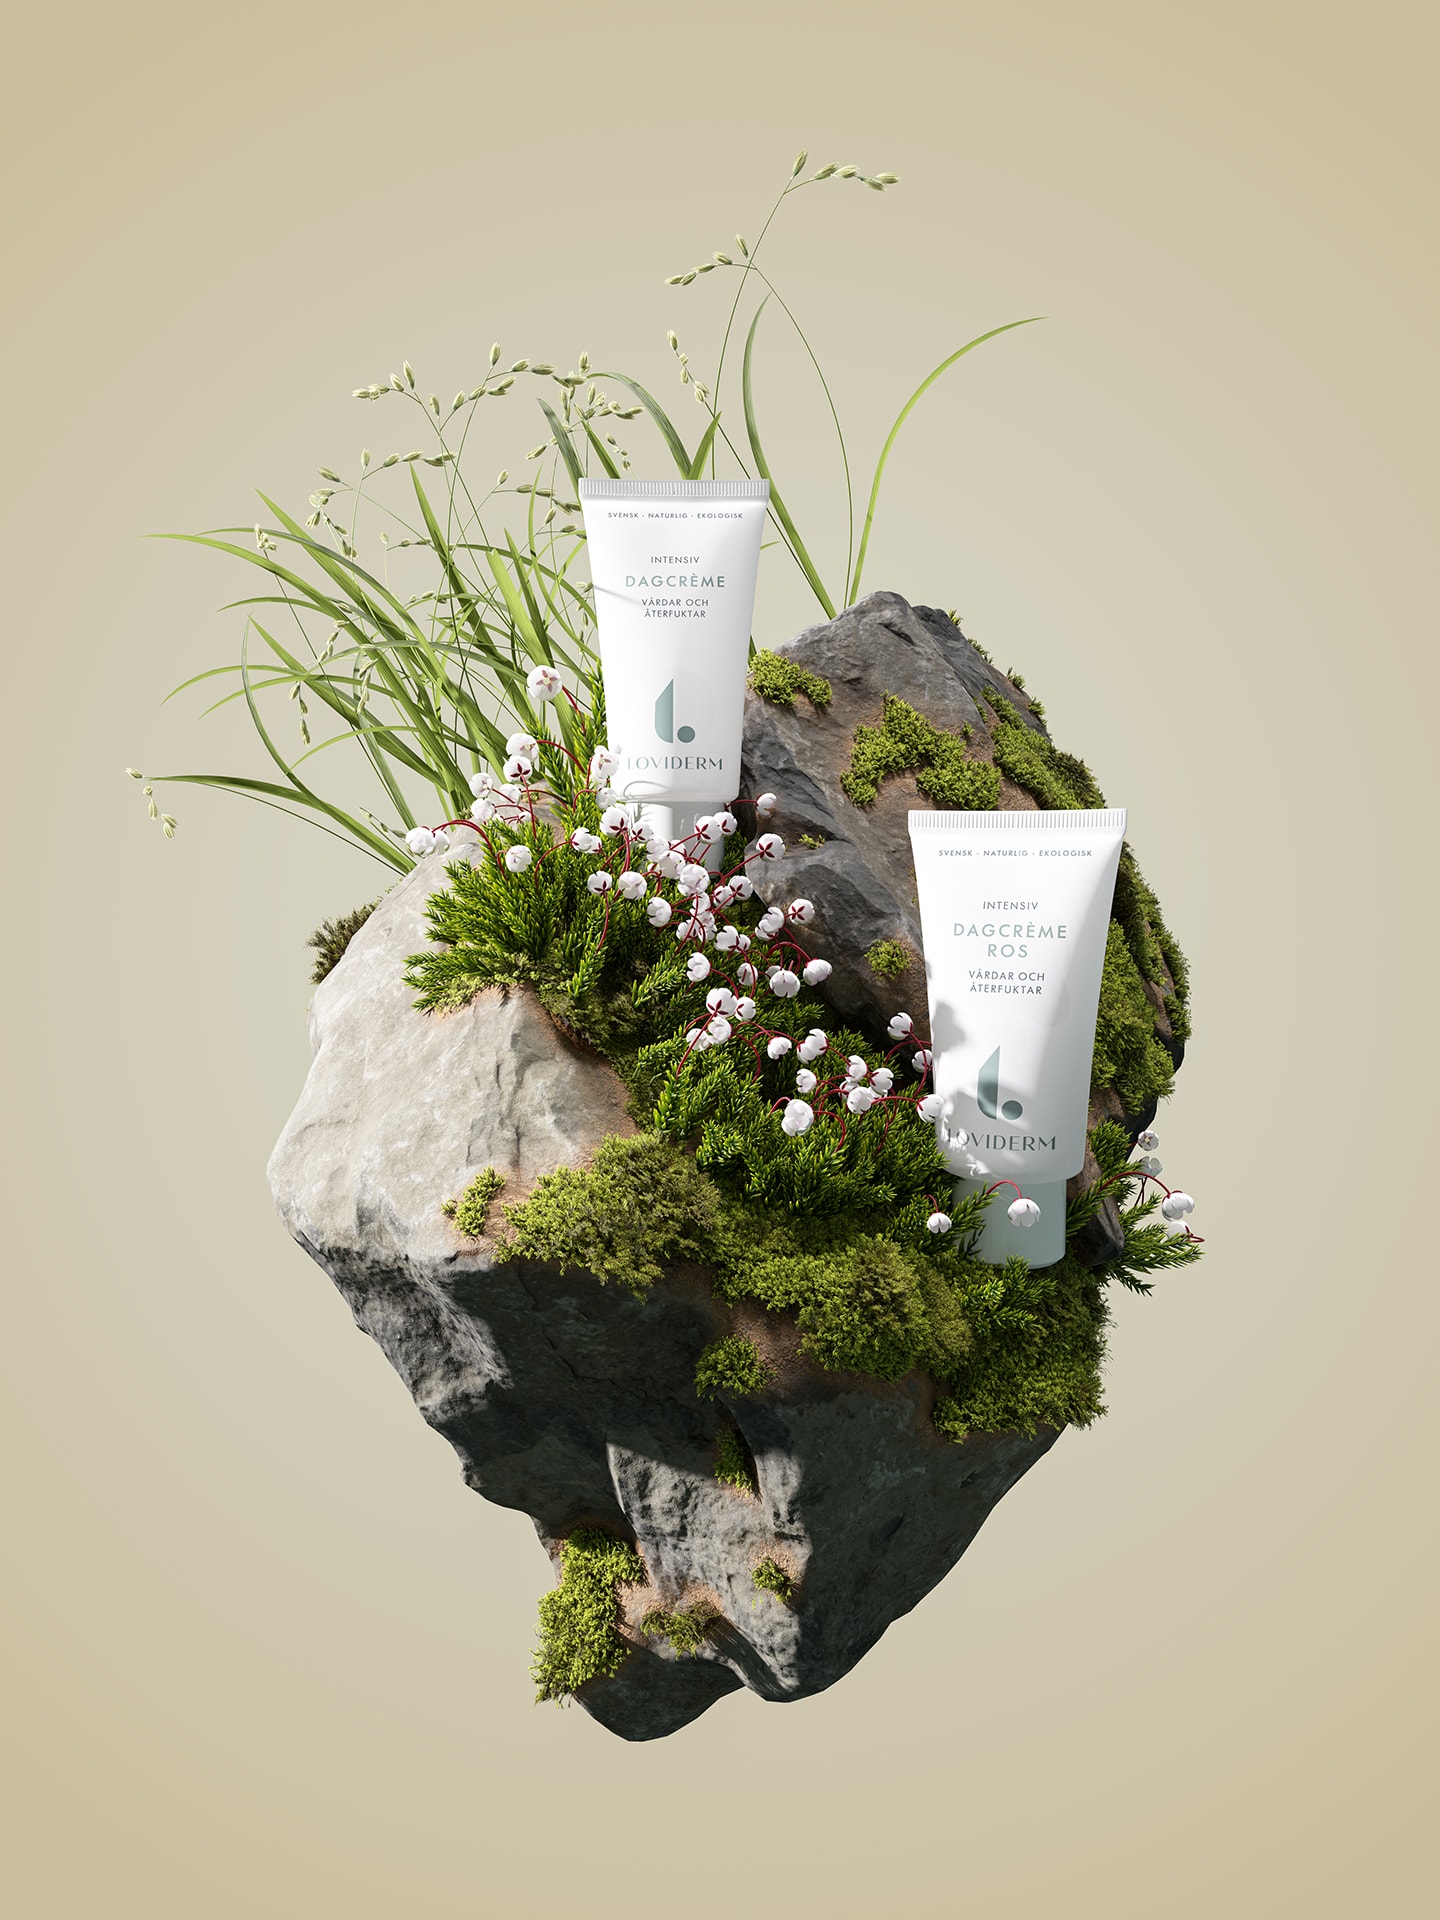 Product image for Loviderm campaign